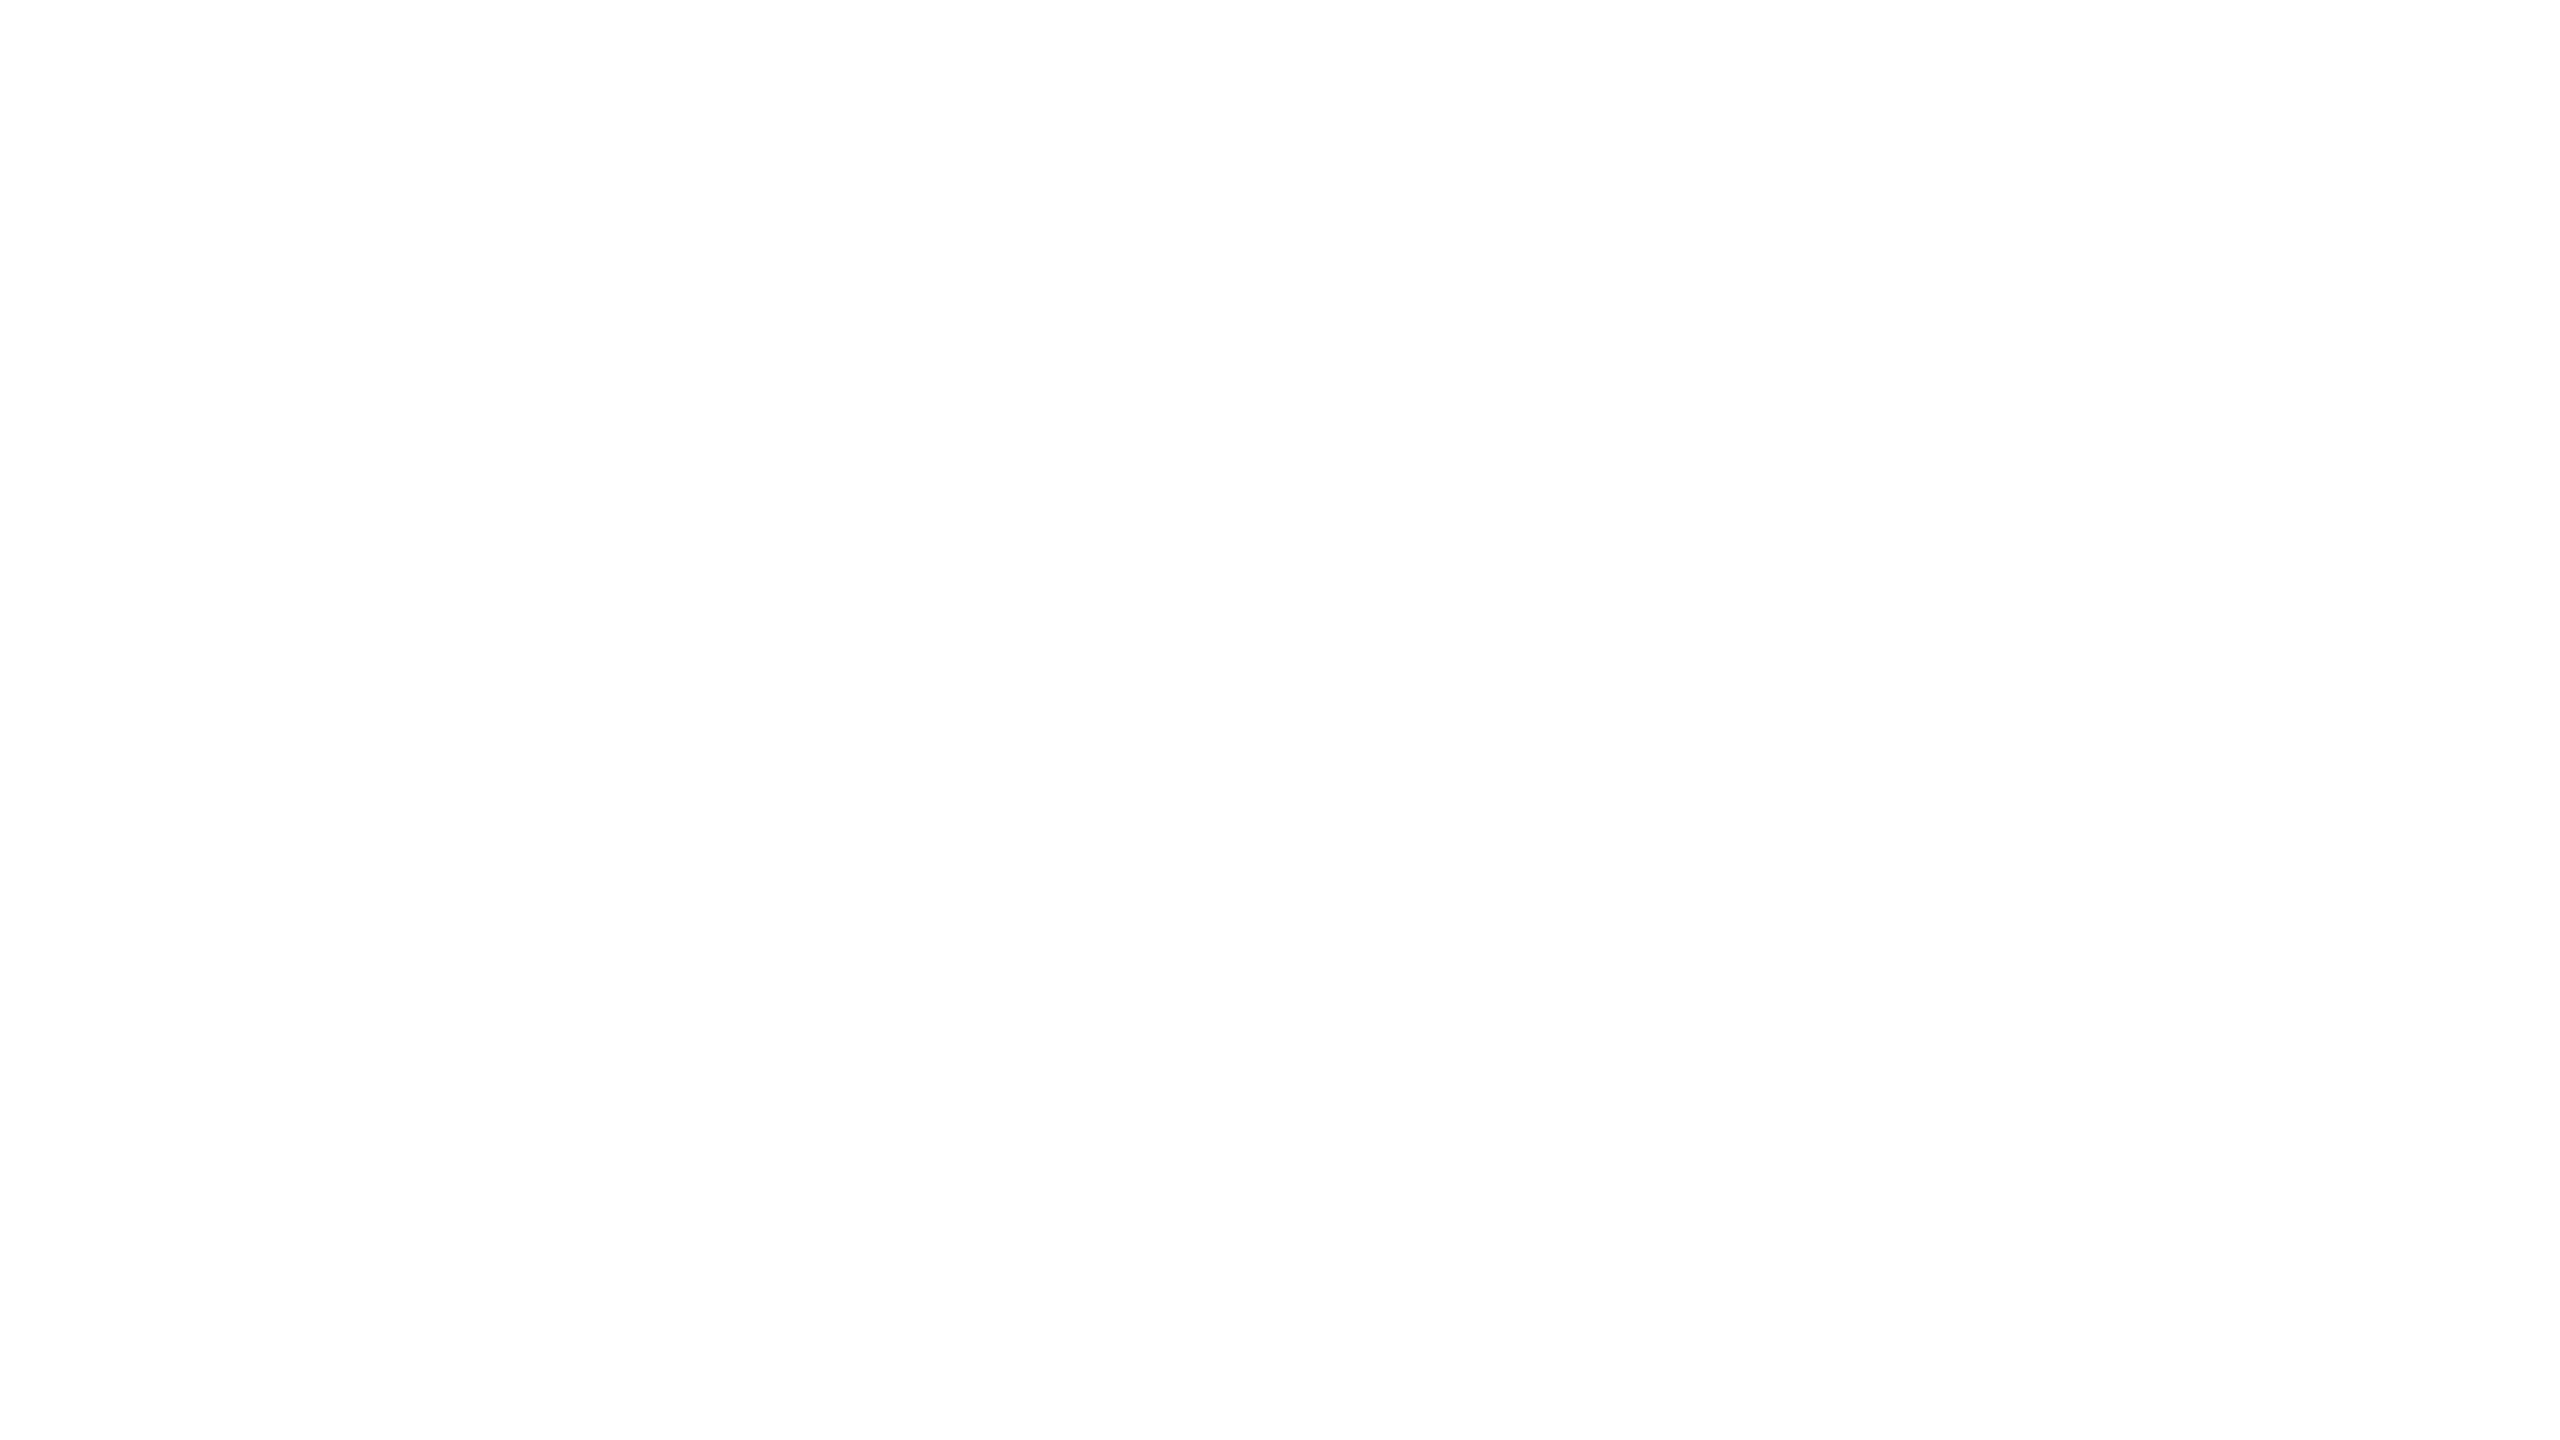 Elite Academic Academy and Downey Unified